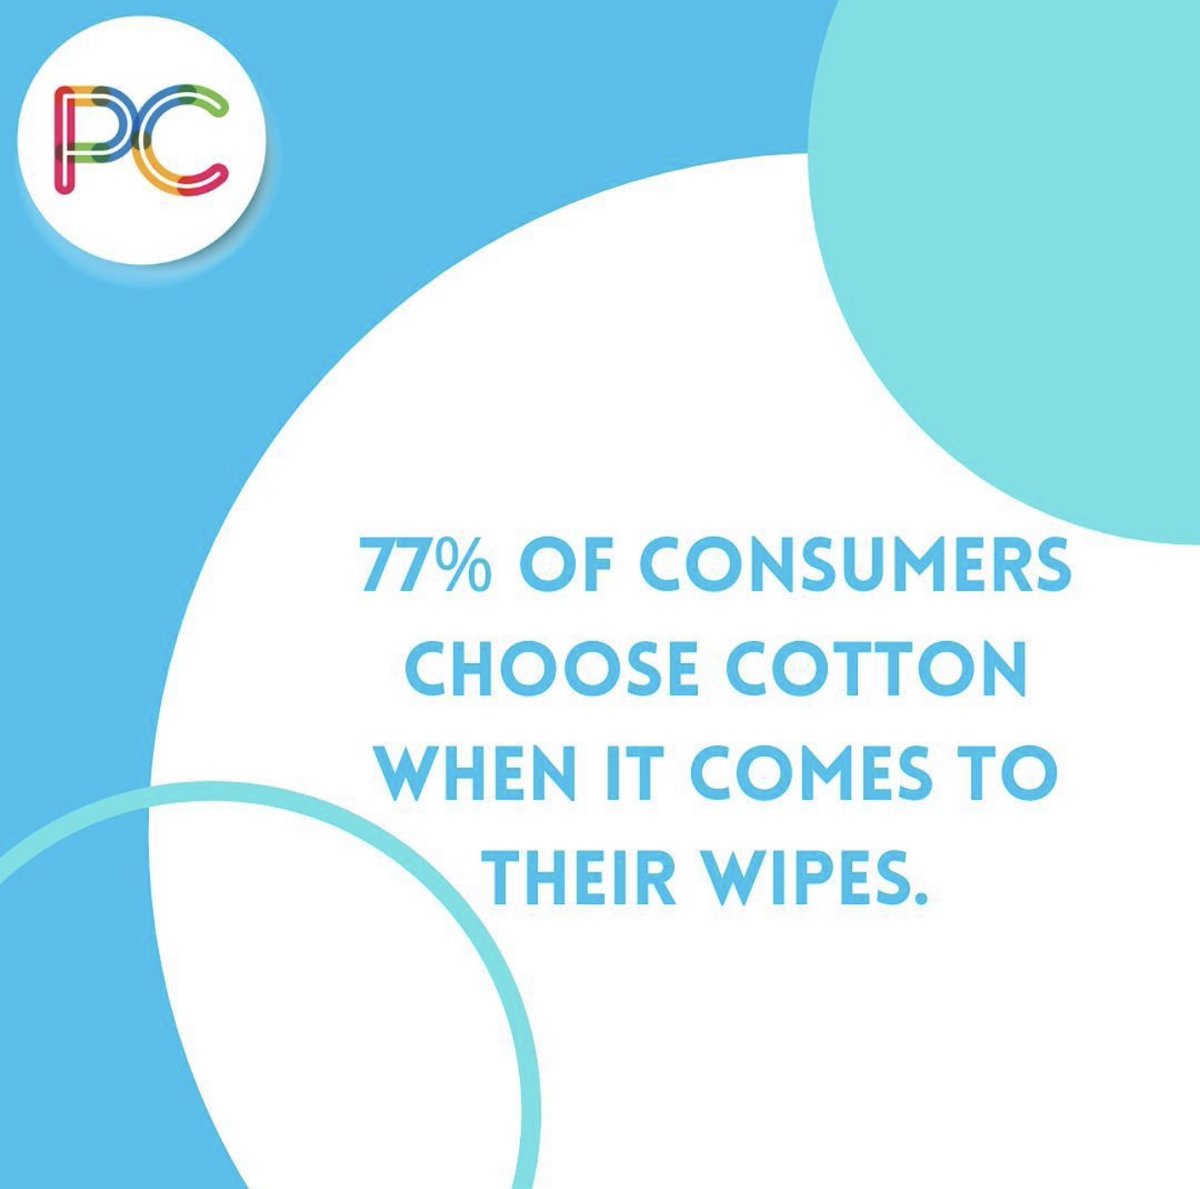 Numbers don't lie. According to a recent report published by #CottonInc, 77% of consumers choose #cotton when it comes to their wipes. Choose #PurifiedCotton. 

#purecotton #cottonwipes #choosecotton #cottonfiber #naturalfibers #cottontalk #comfortability #sustainability #wipes